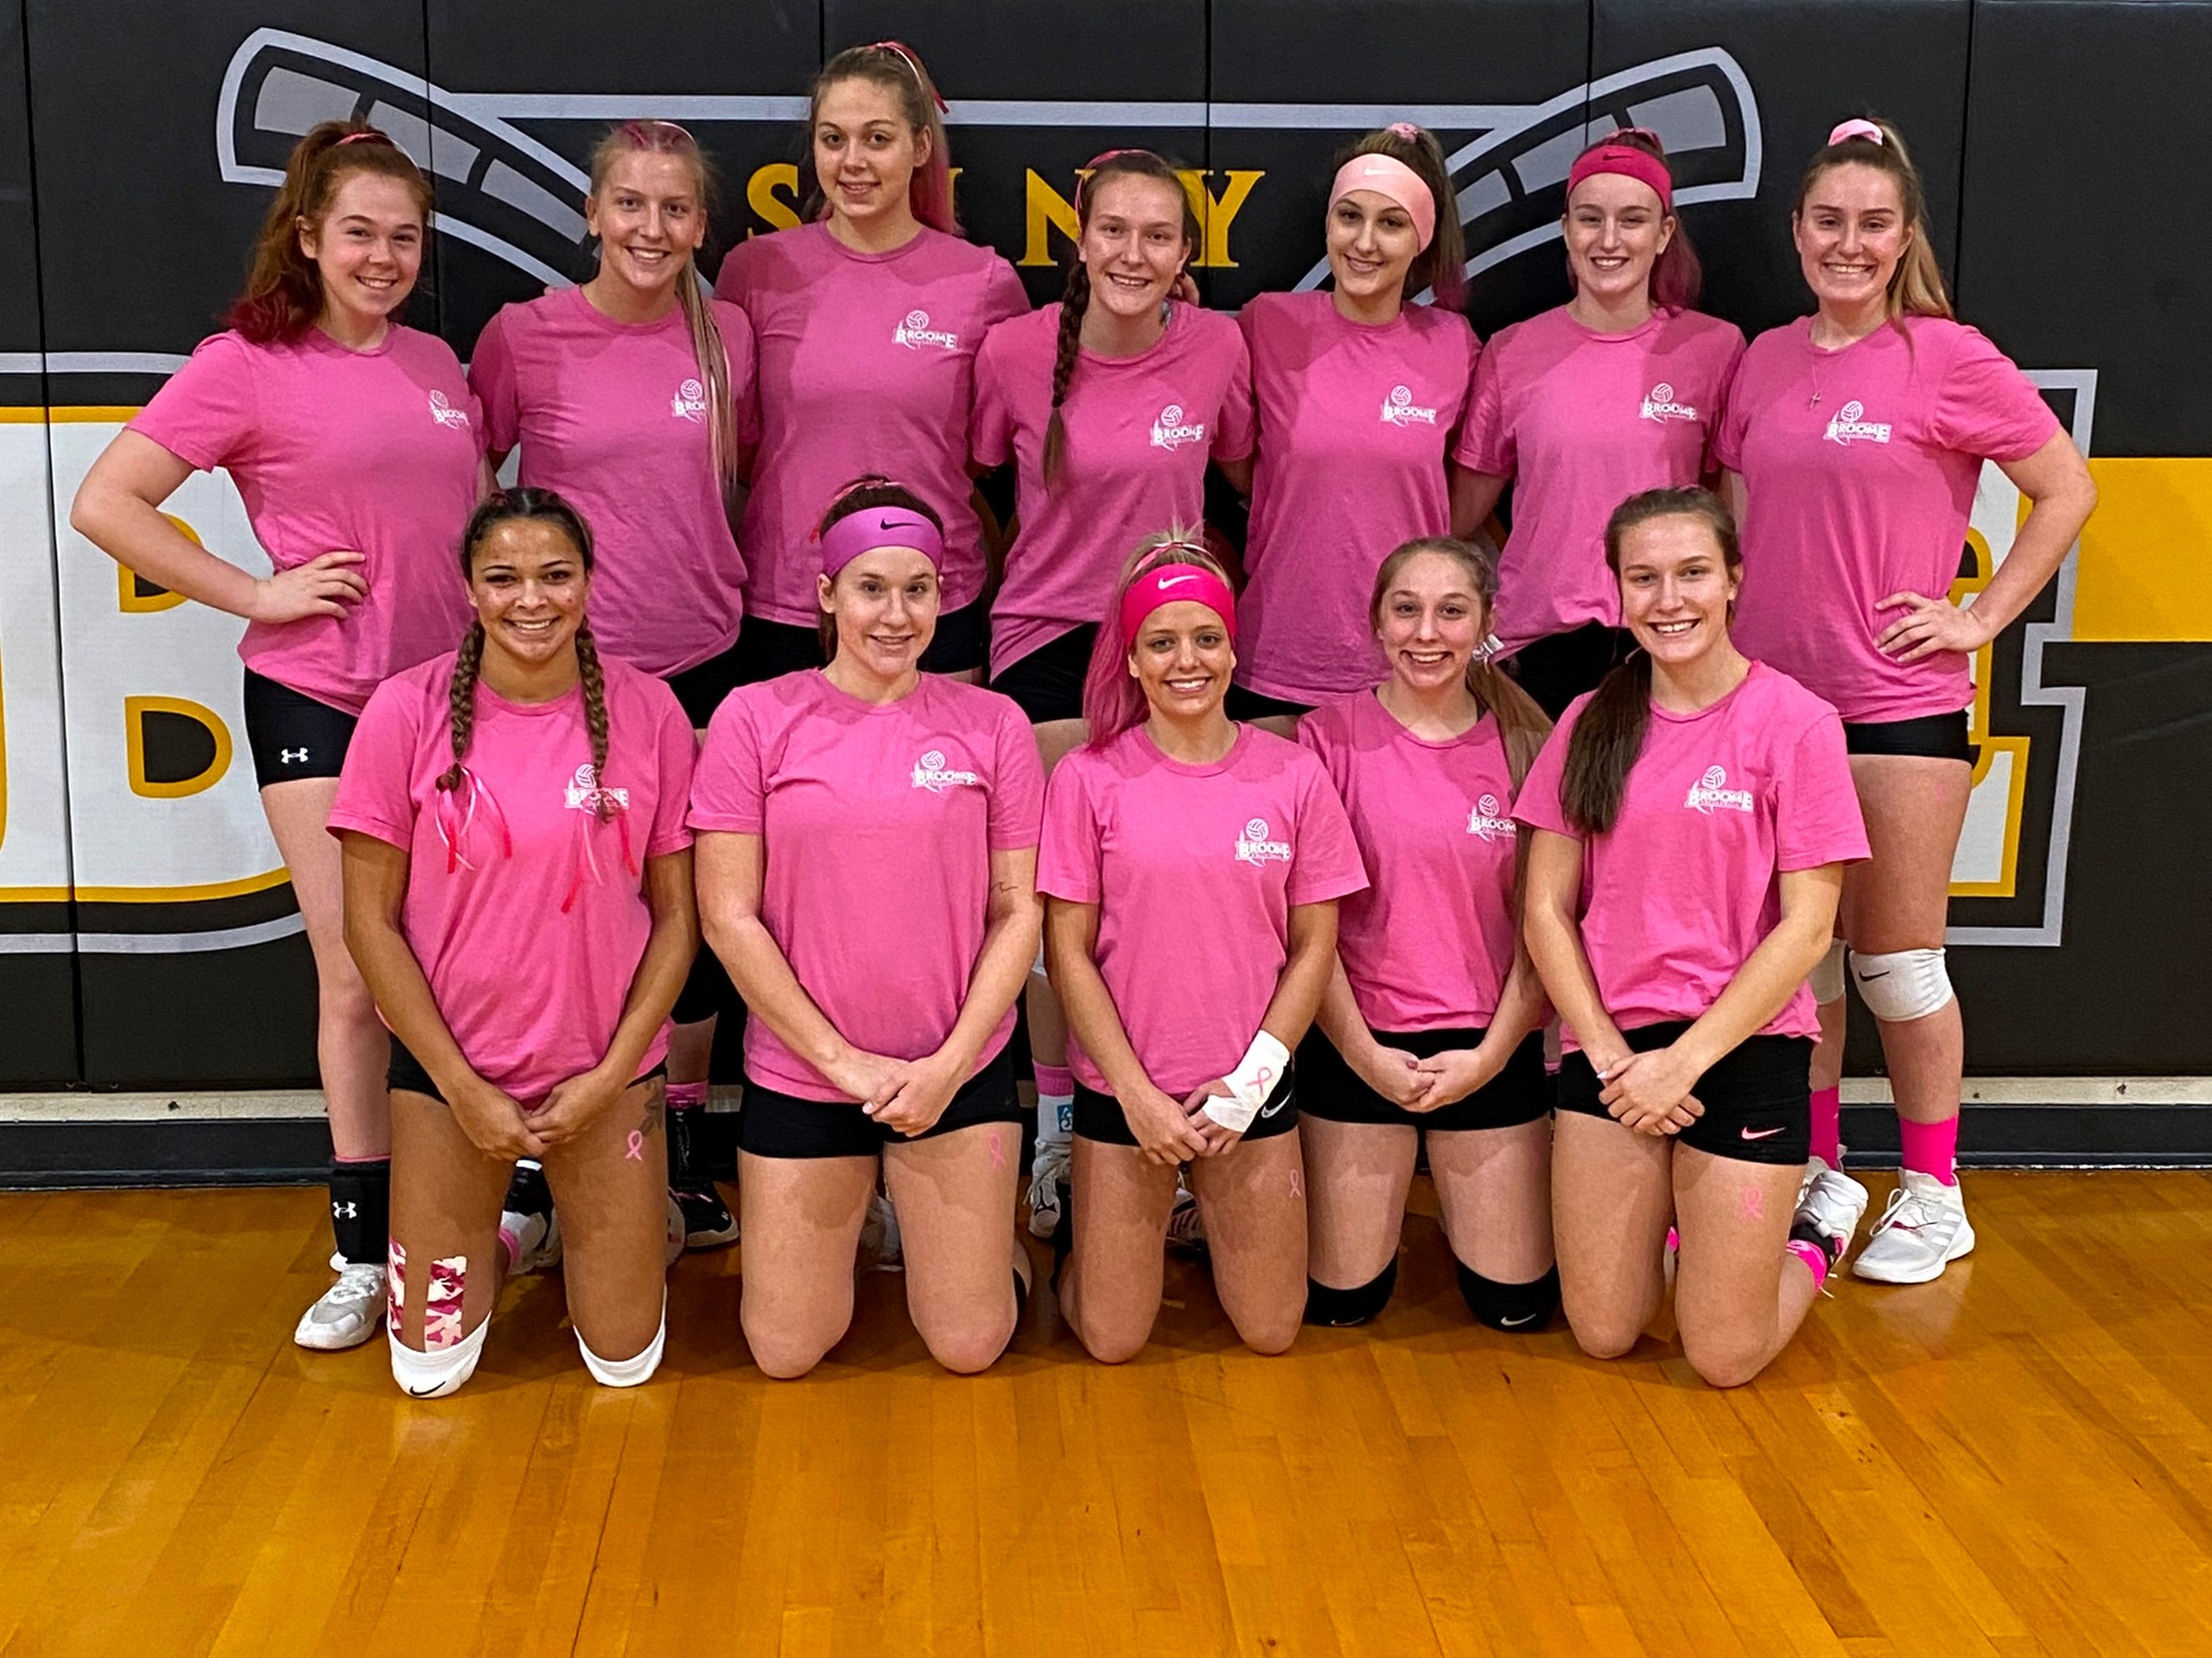 Team picture in pink shirts